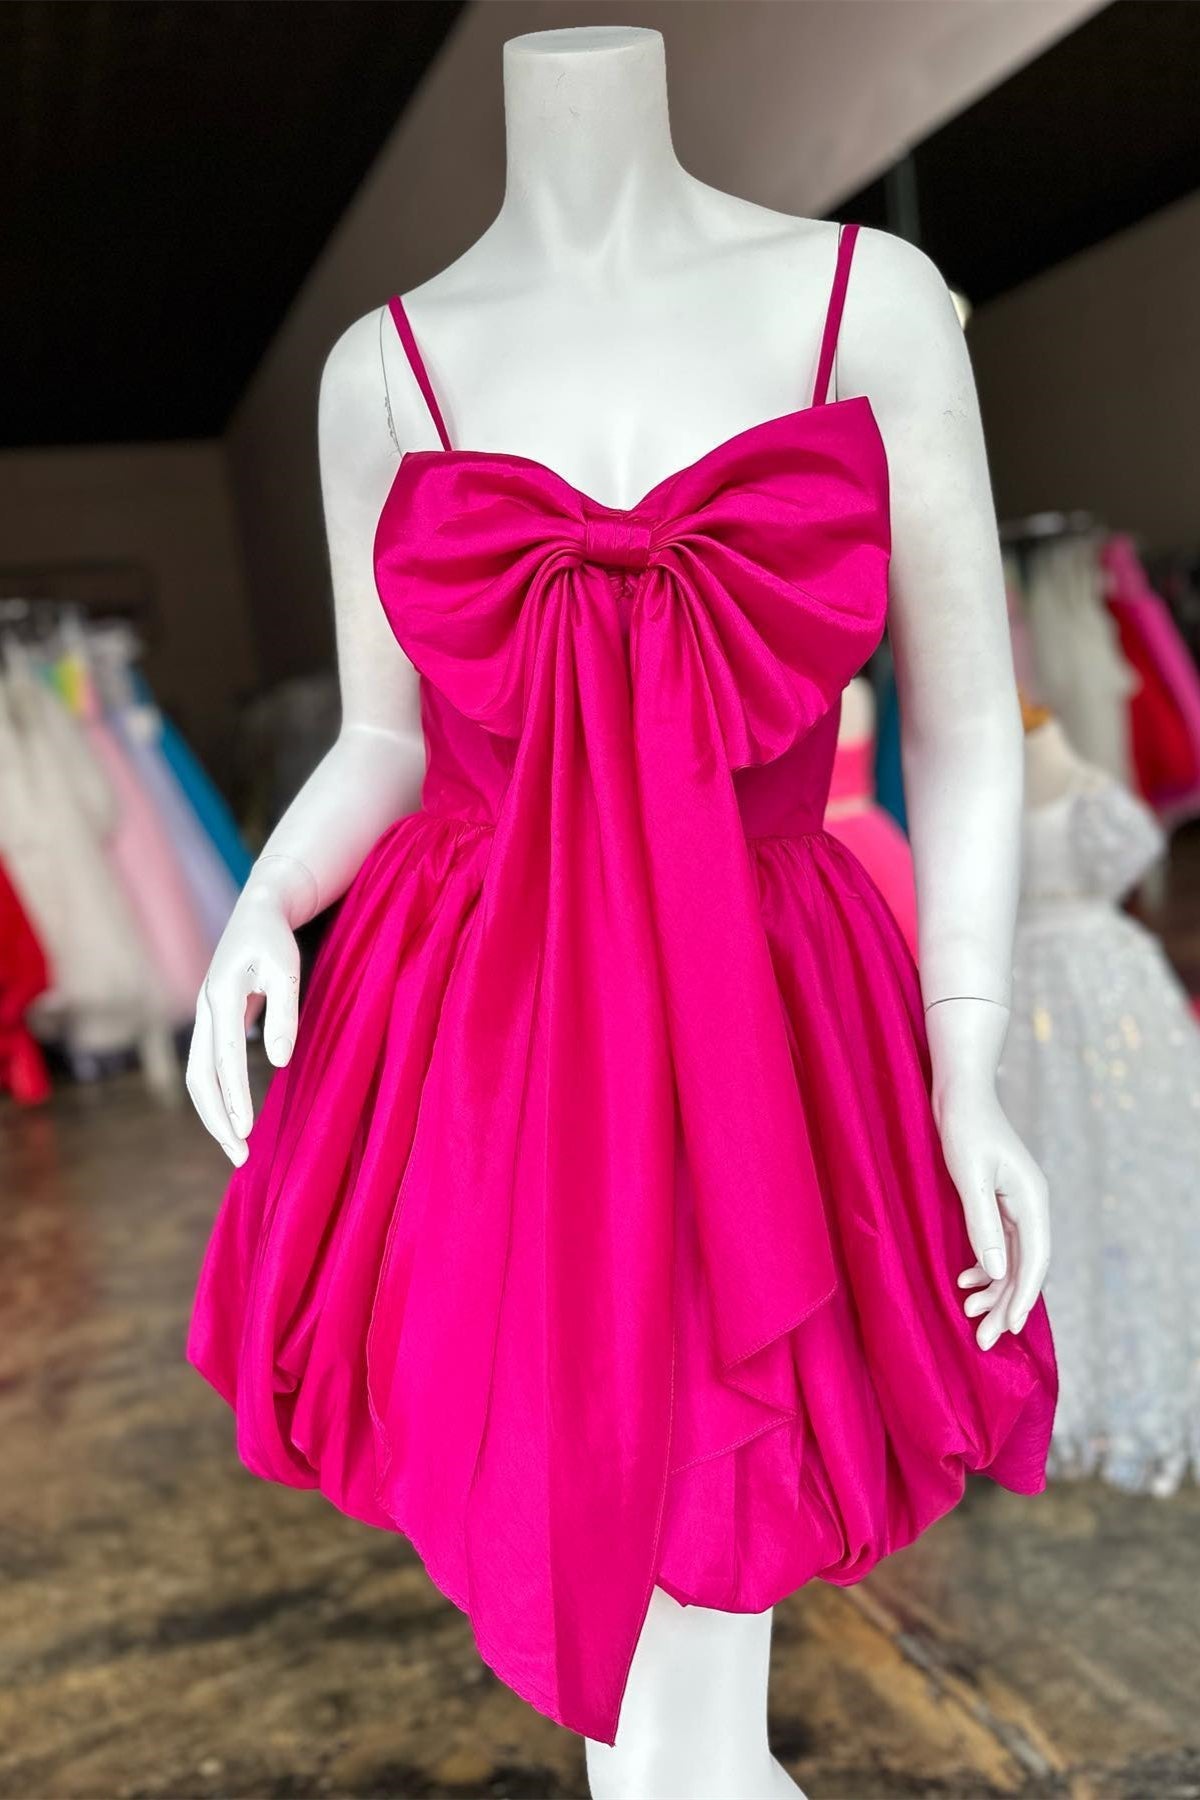 Formal Dresses Shop, Fuchsia Straps Satin A-line Homecoming Dress with Bow